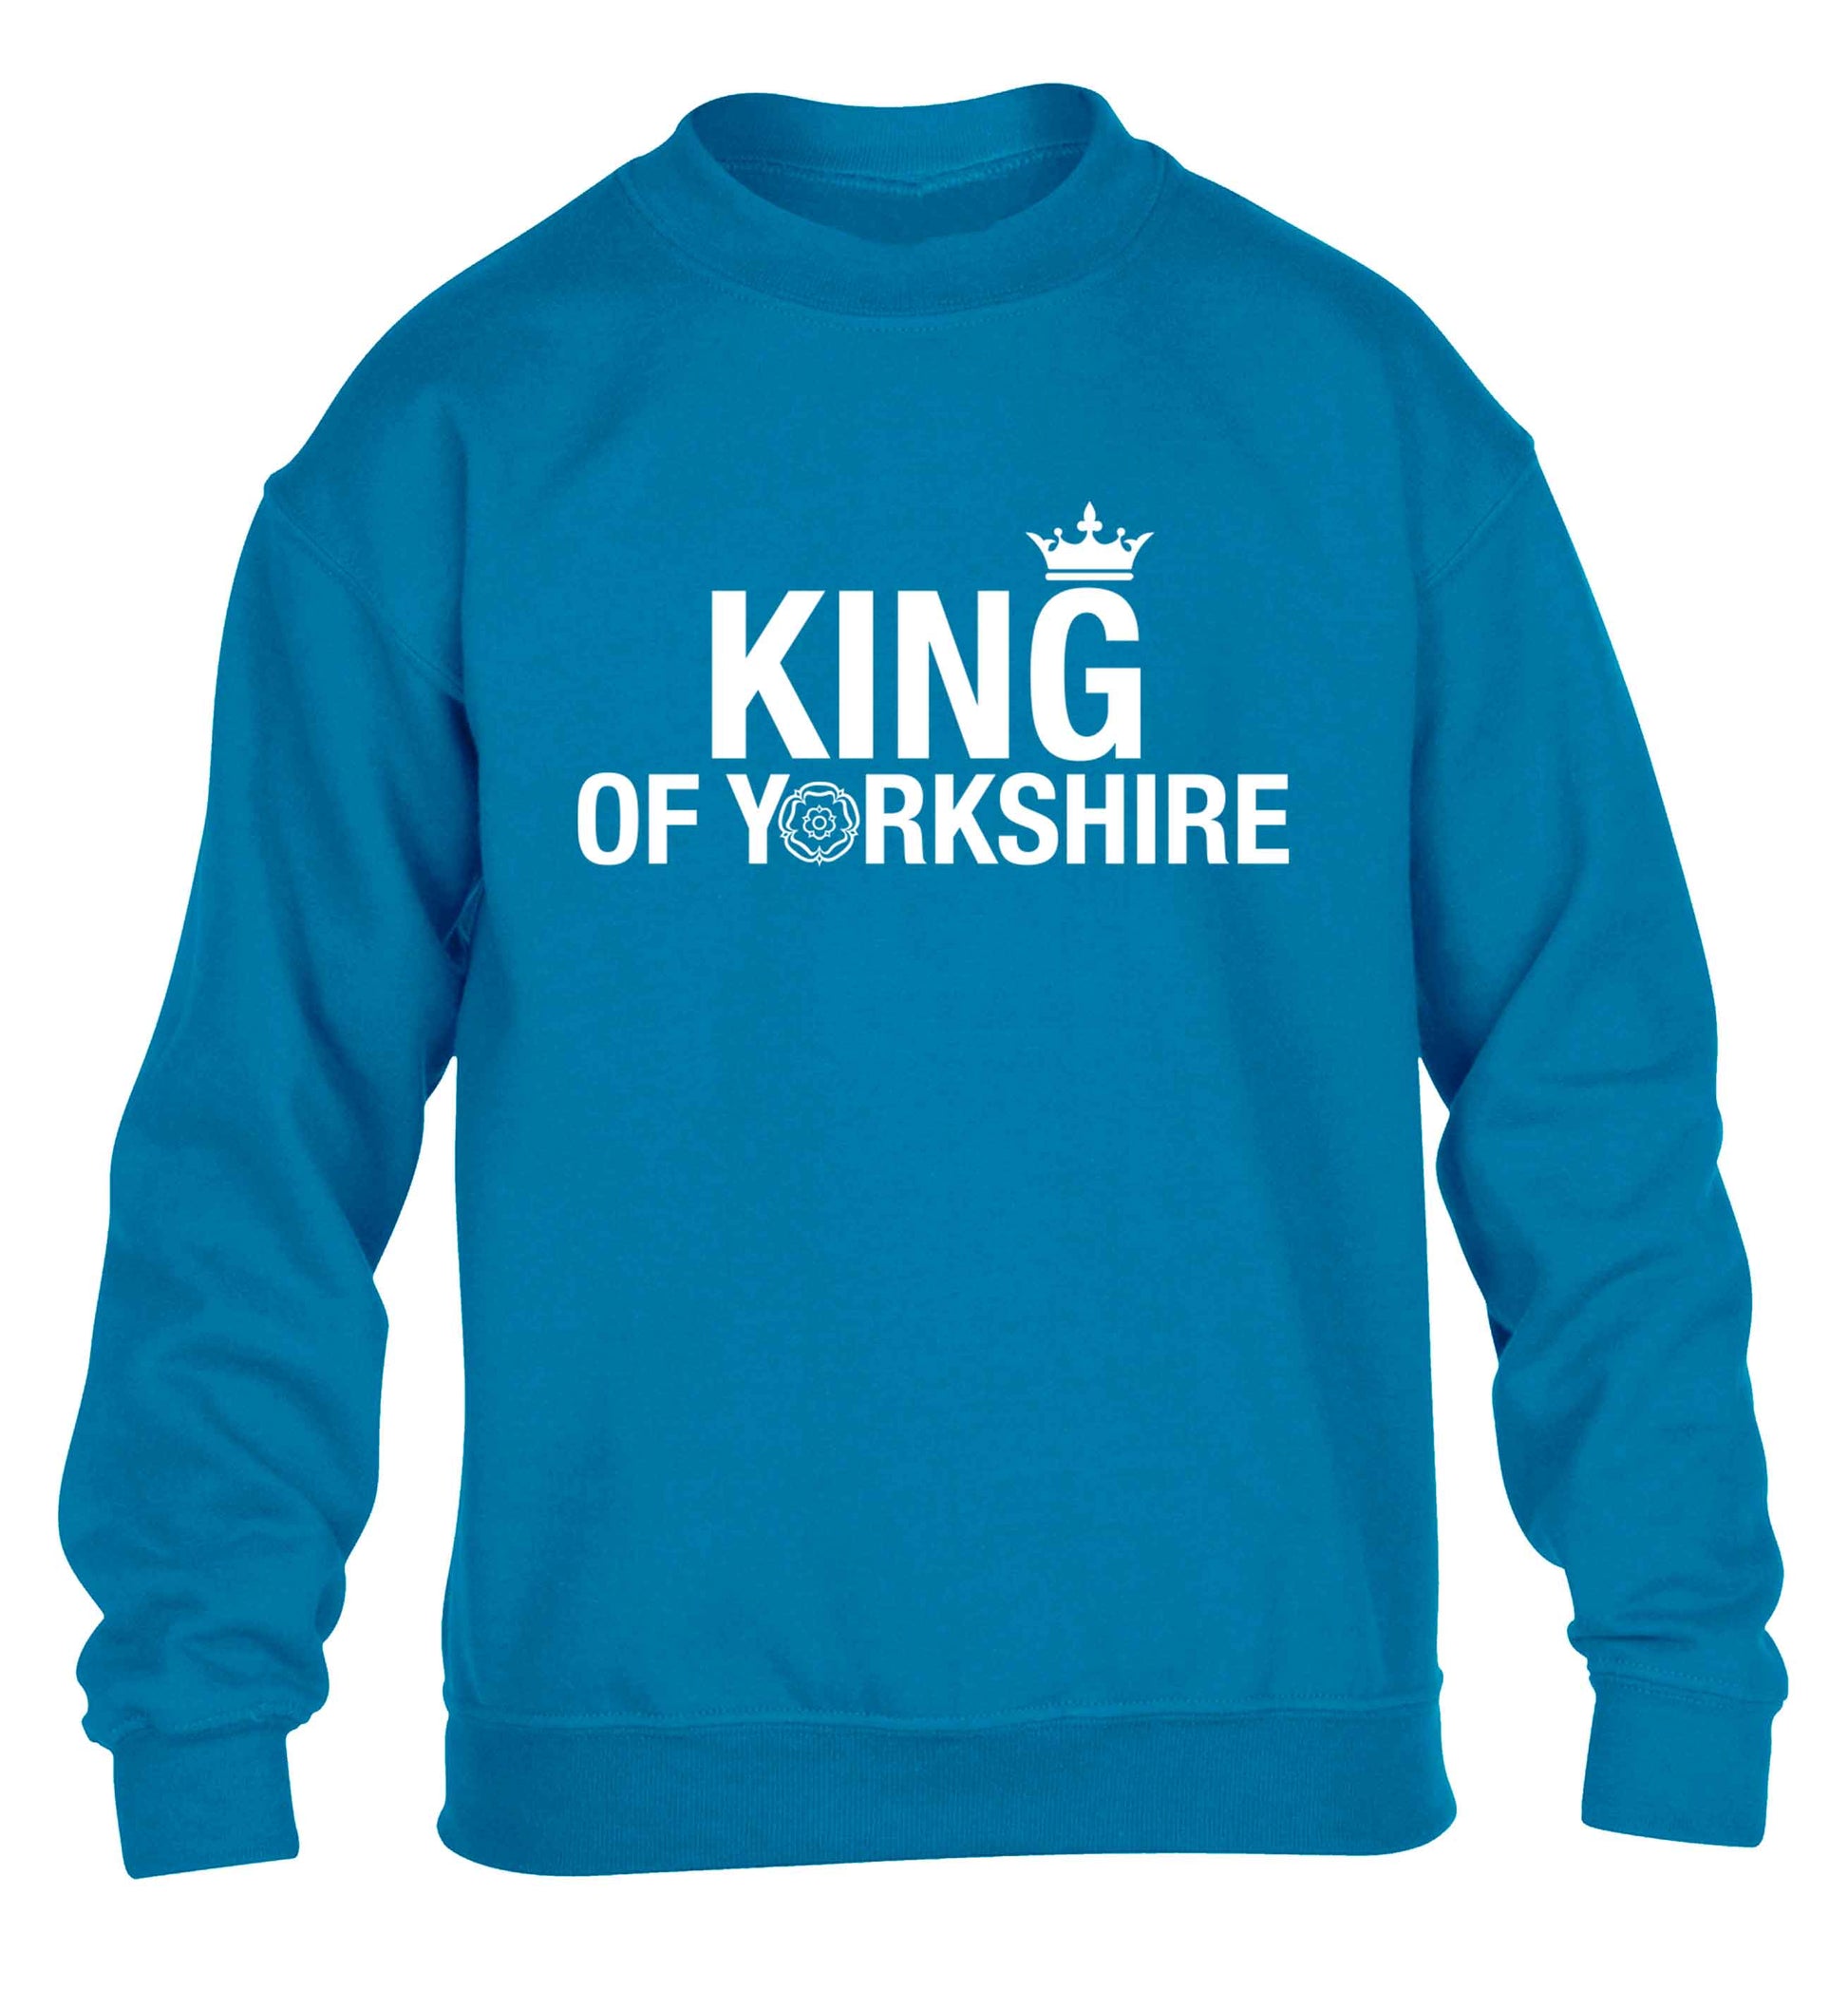 King of Yorkshire children's blue sweater 12-13 Years